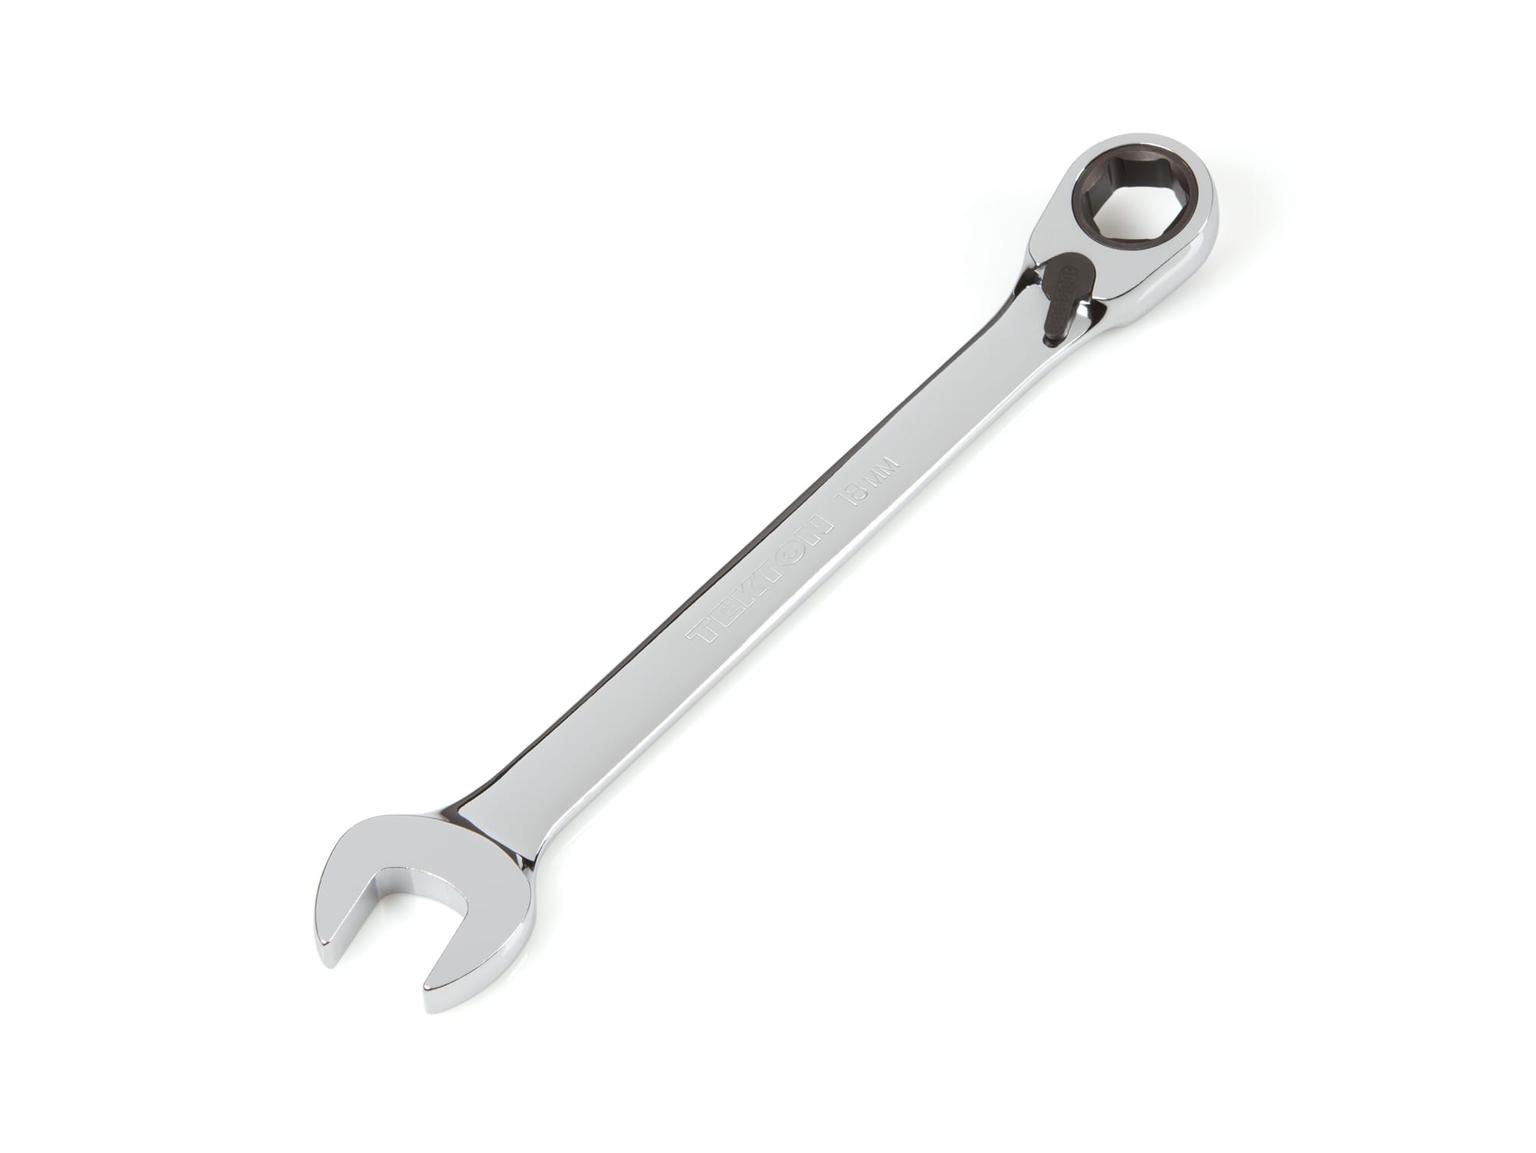 TEKTON WRN56118-T 18 mm Reversible Ratcheting Combination Wrench